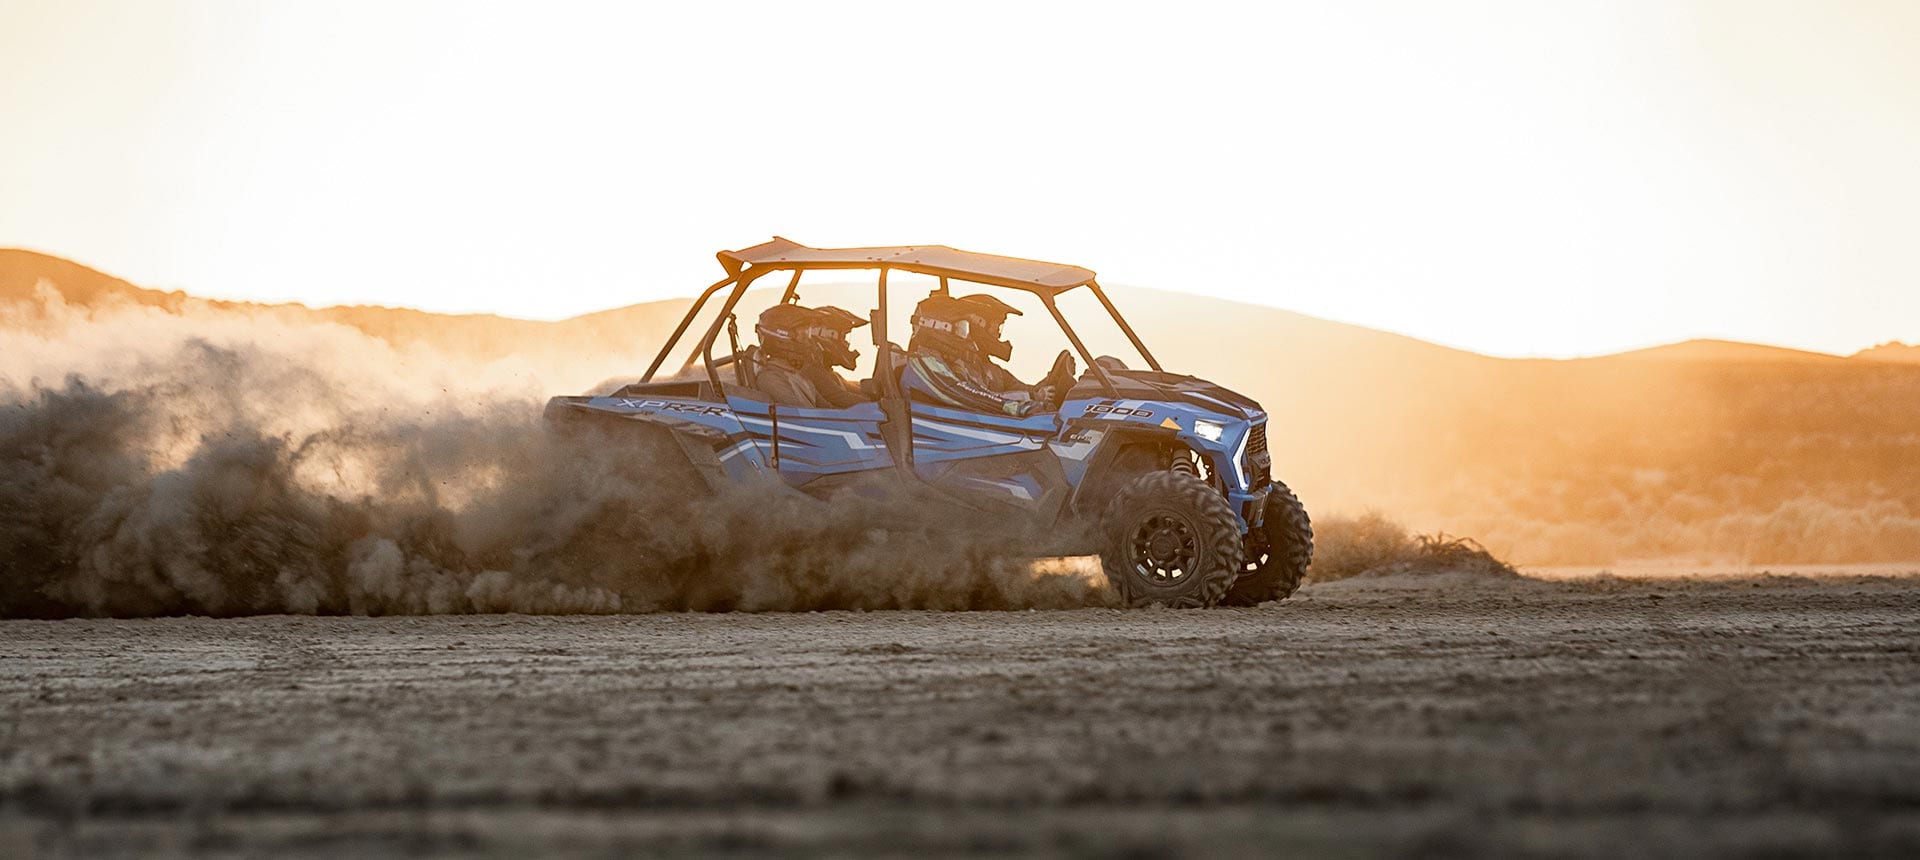 RZR XP 4 1000 4 SEATER OFFROAD VEHICLE